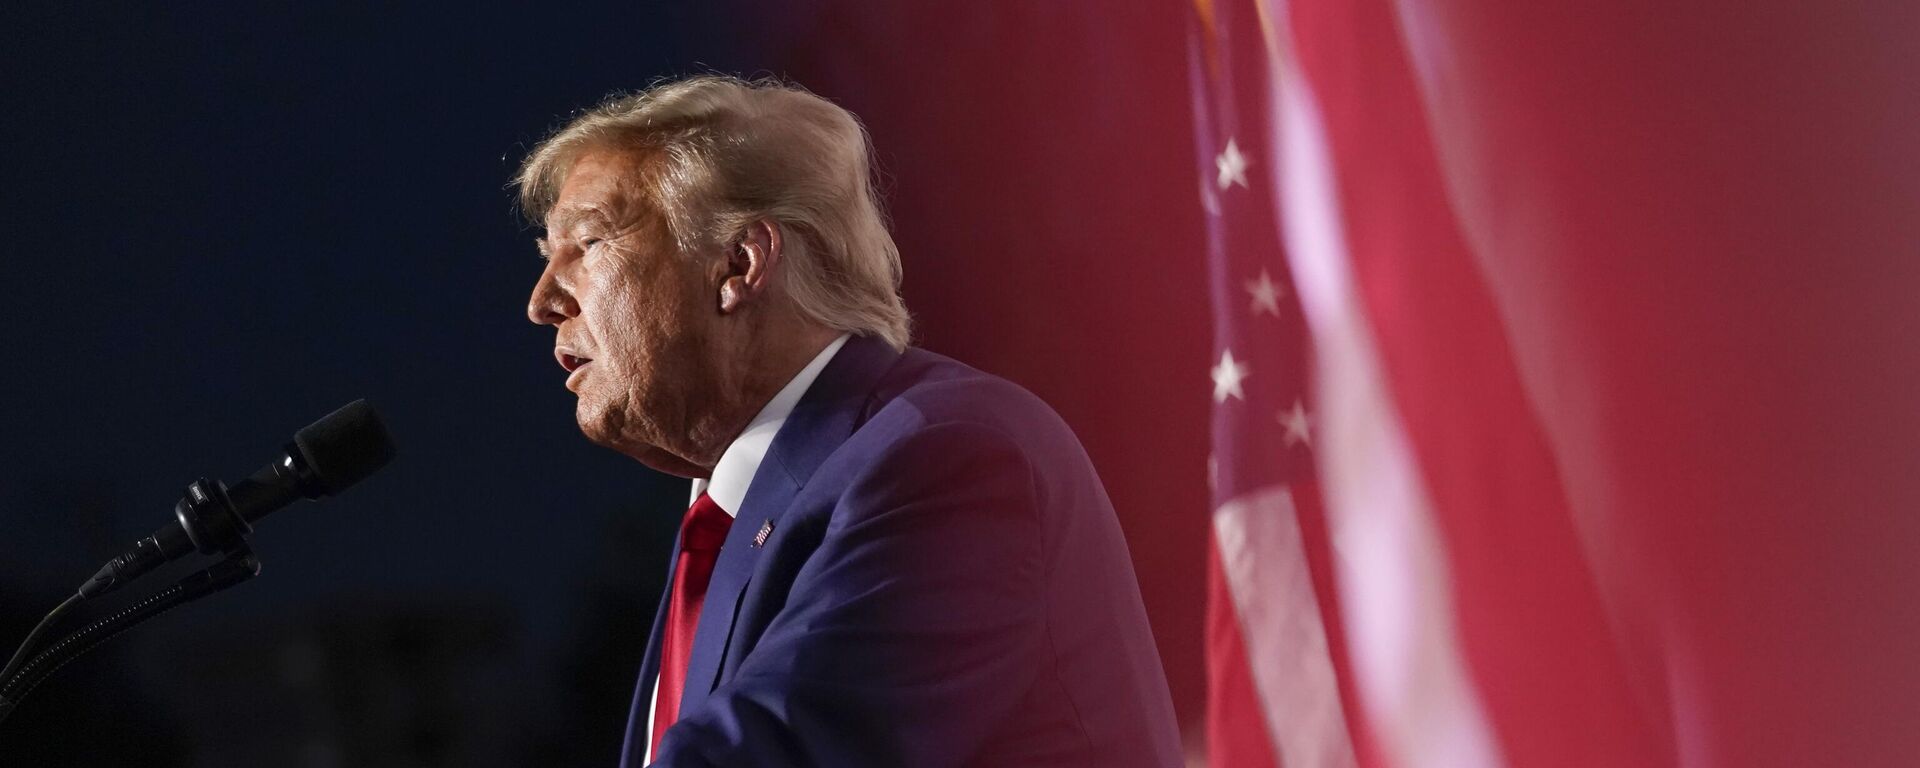 Former President Donald Trump speaks at Trump National Golf Club in Bedminster, N.J., Tuesday, June 13, 2023, after pleading not guilty in a Miami courtroom earlier in the day to dozens of felony counts that he hoarded classified documents and refused government demands to give them back. - Sputnik International, 1920, 16.07.2023